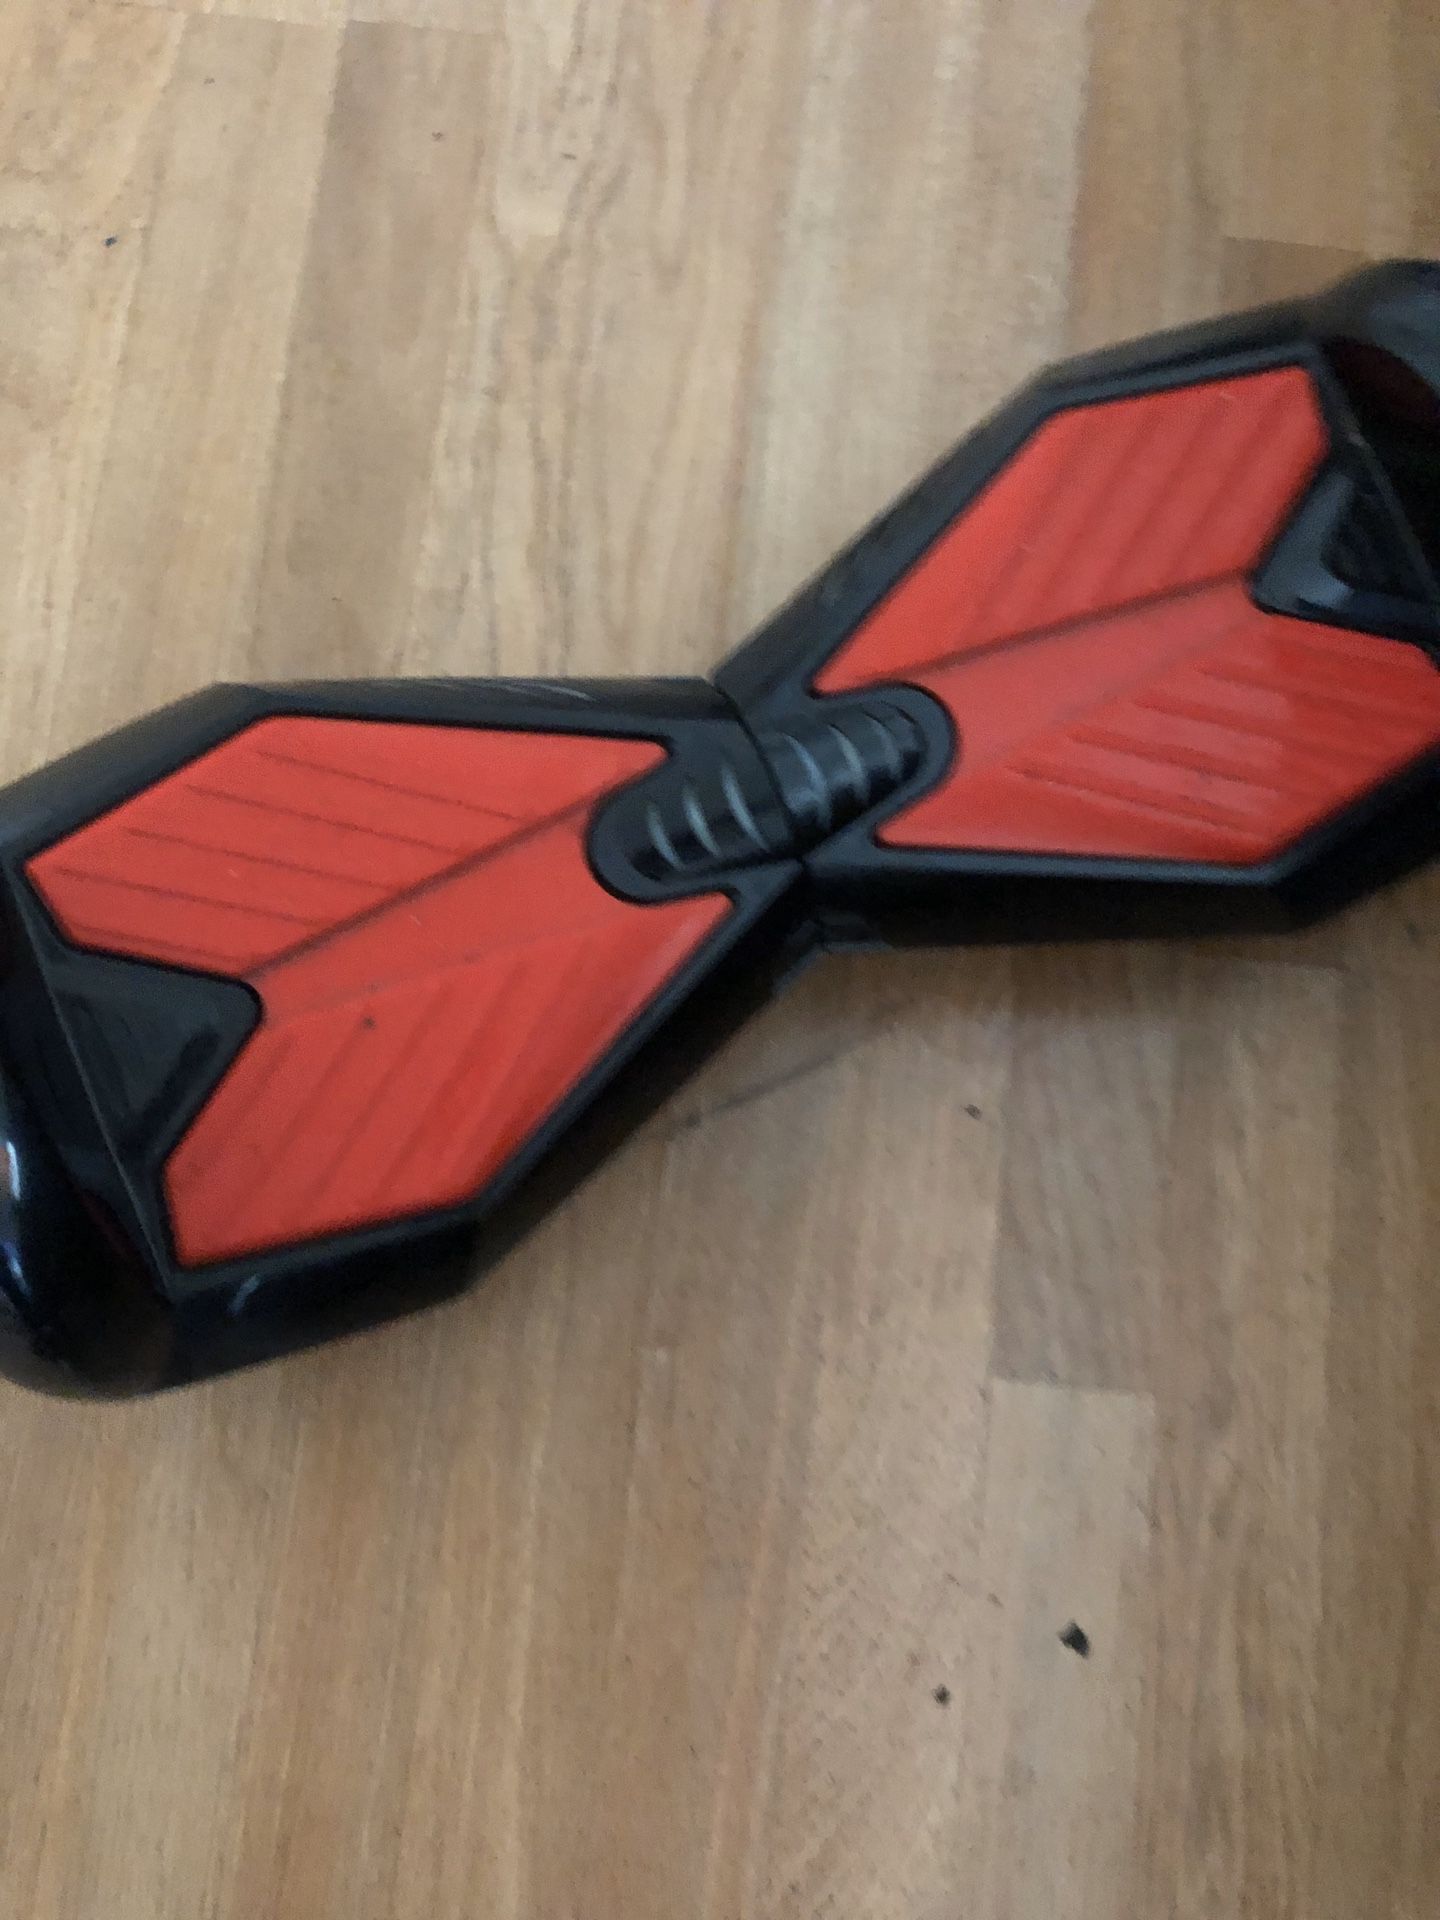 Black and Red Hoverboard